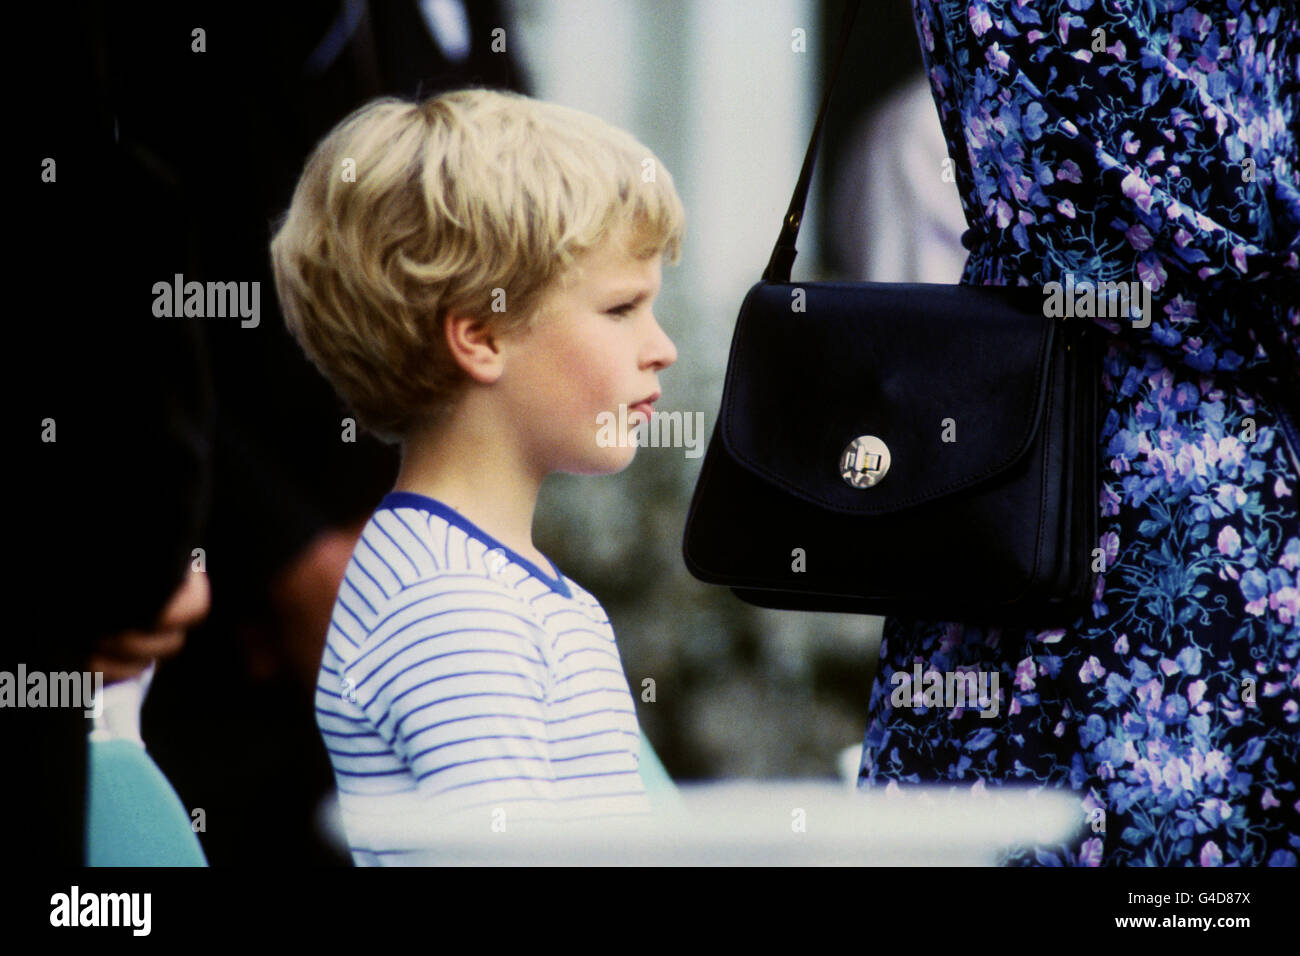 Peter Phillips, aged 3, the son of Princess Anne and Captain Mark Phillips, at Smith's Lawn, Windsor. Stock Photo